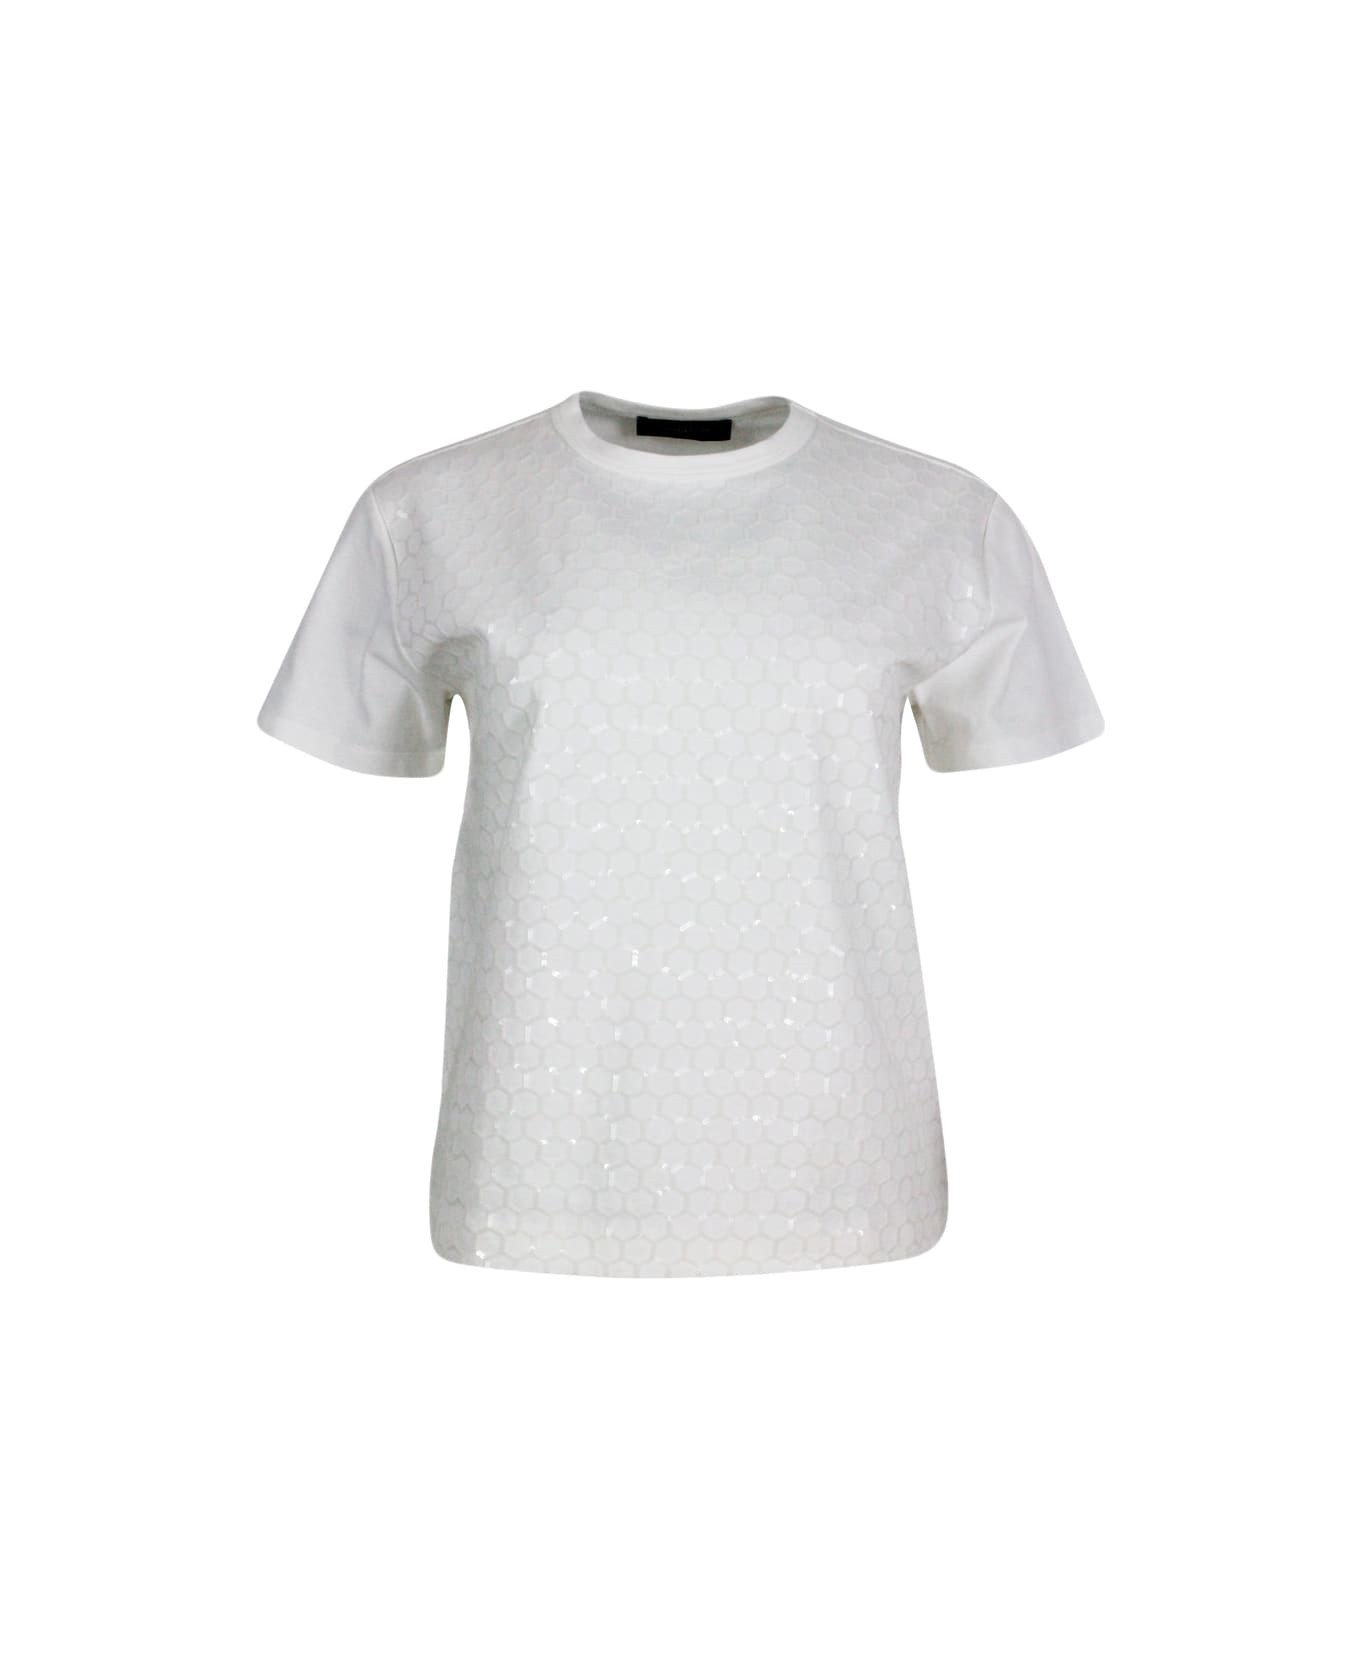 Fabiana Filippi Crew-neck, Short-sleeved T-shirt Made Of Soft Cotton Embellished With Sequin Applications That Give A Three-dimensional Effect To The Garment. - White